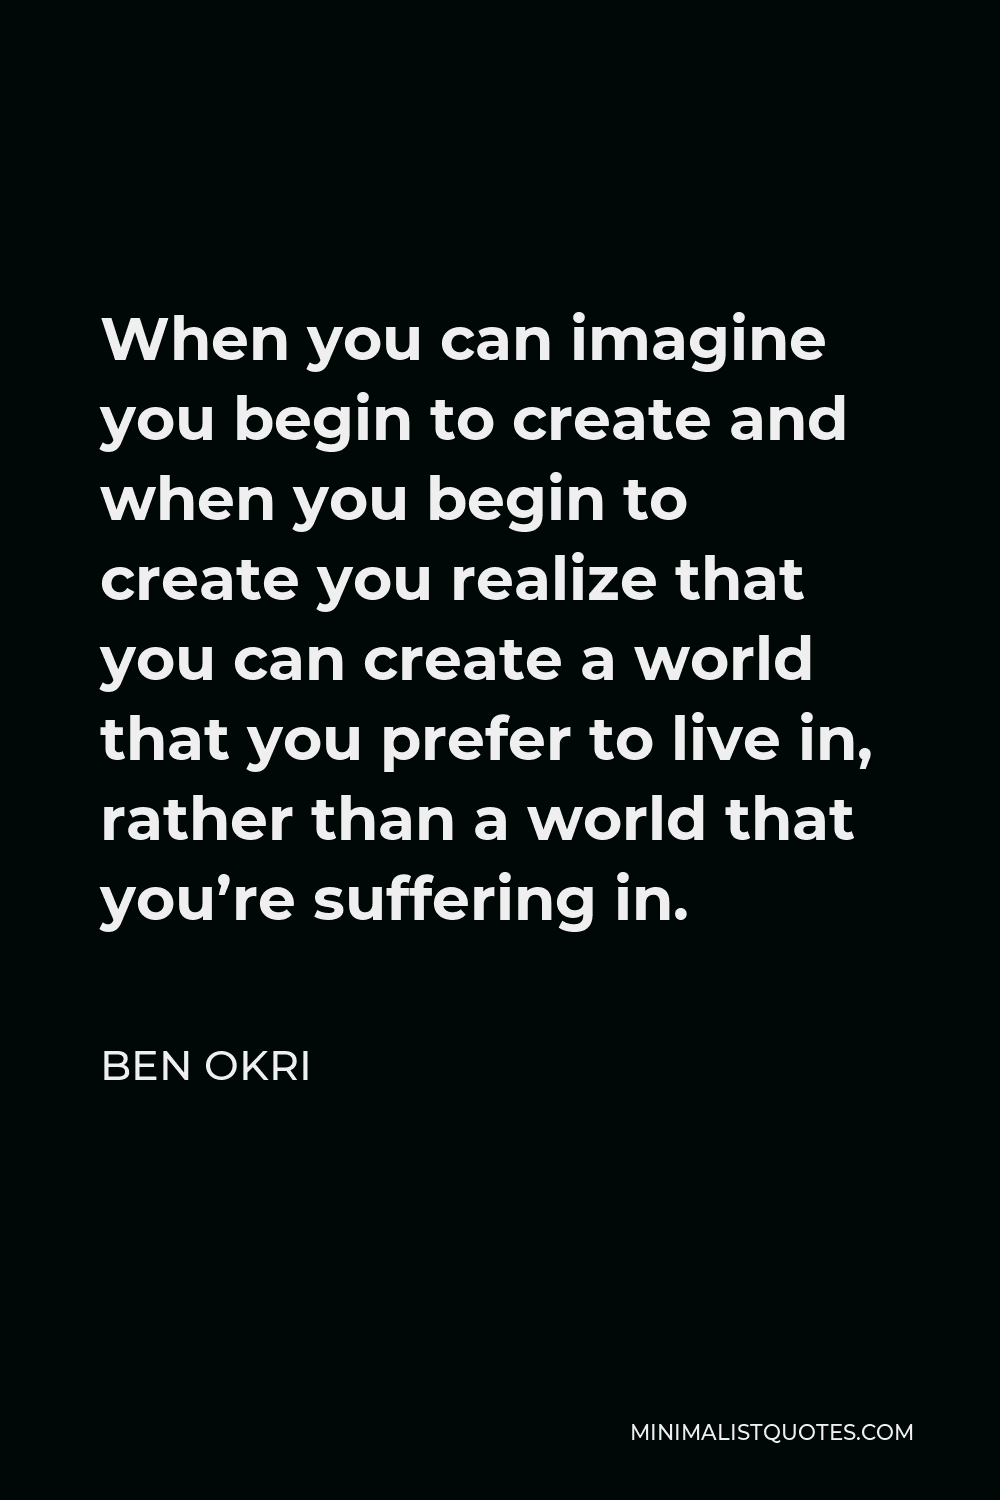 Ben Okri Quote - When you can imagine you begin to create and when you begin to create you realize that you can create a world that you prefer to live in, rather than a world that you’re suffering in.